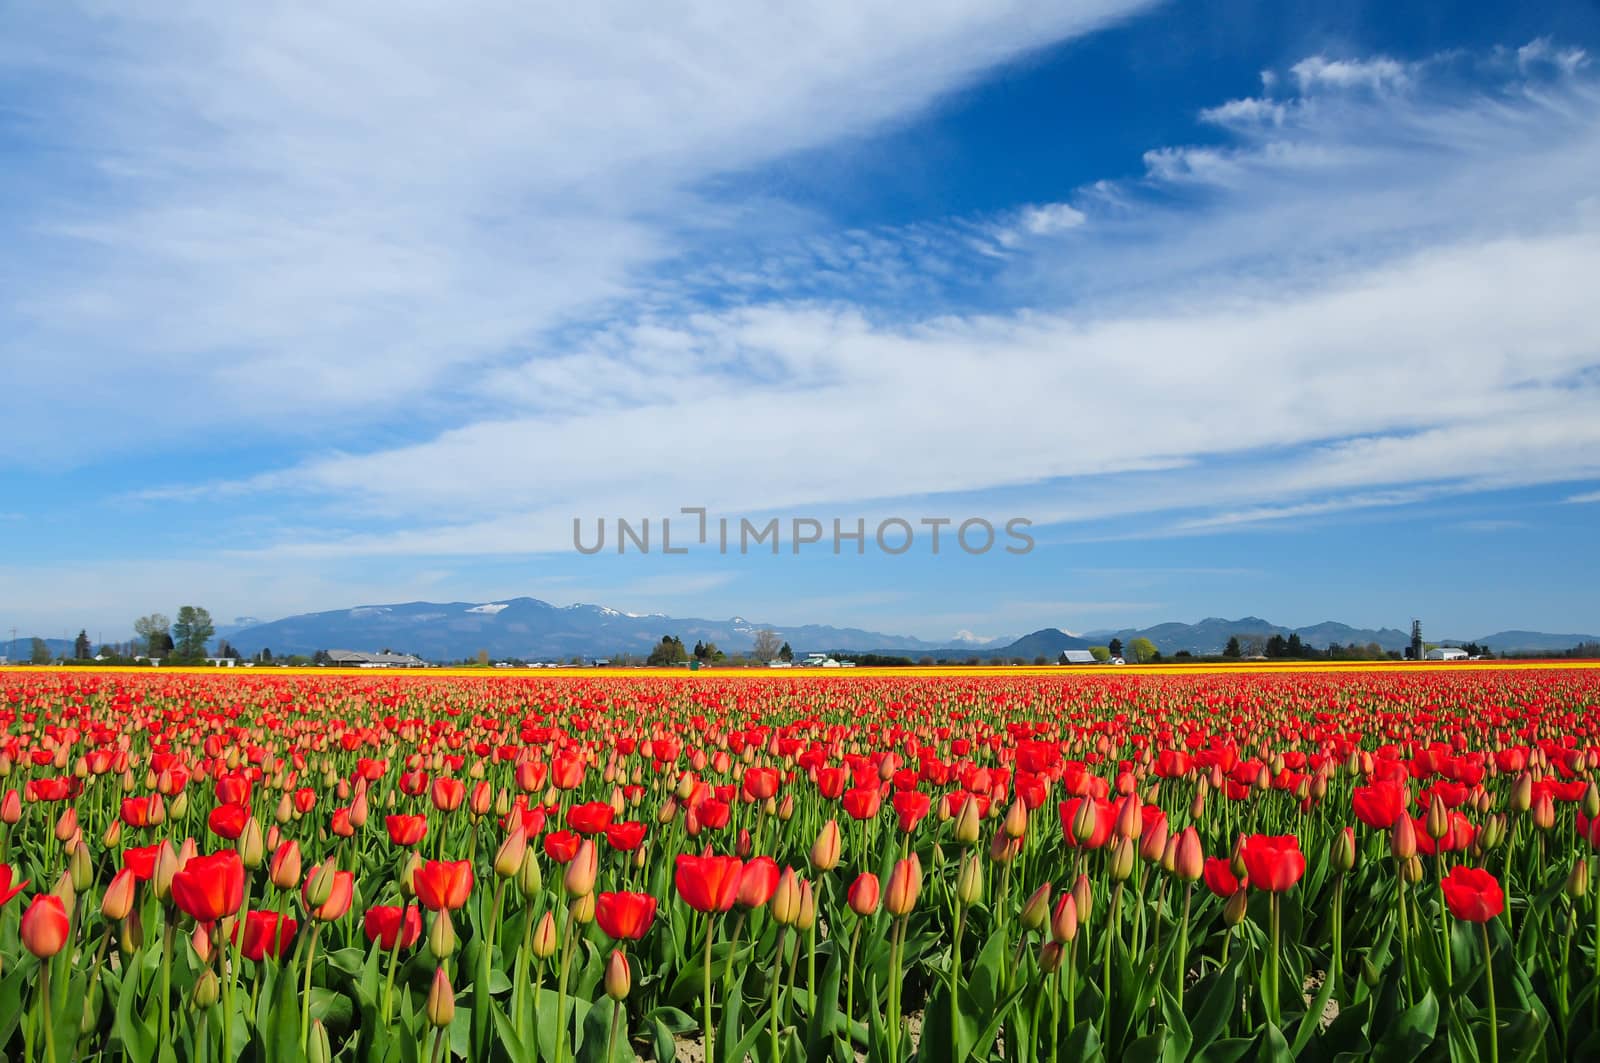 Skagit Valley Tulips by cestes001